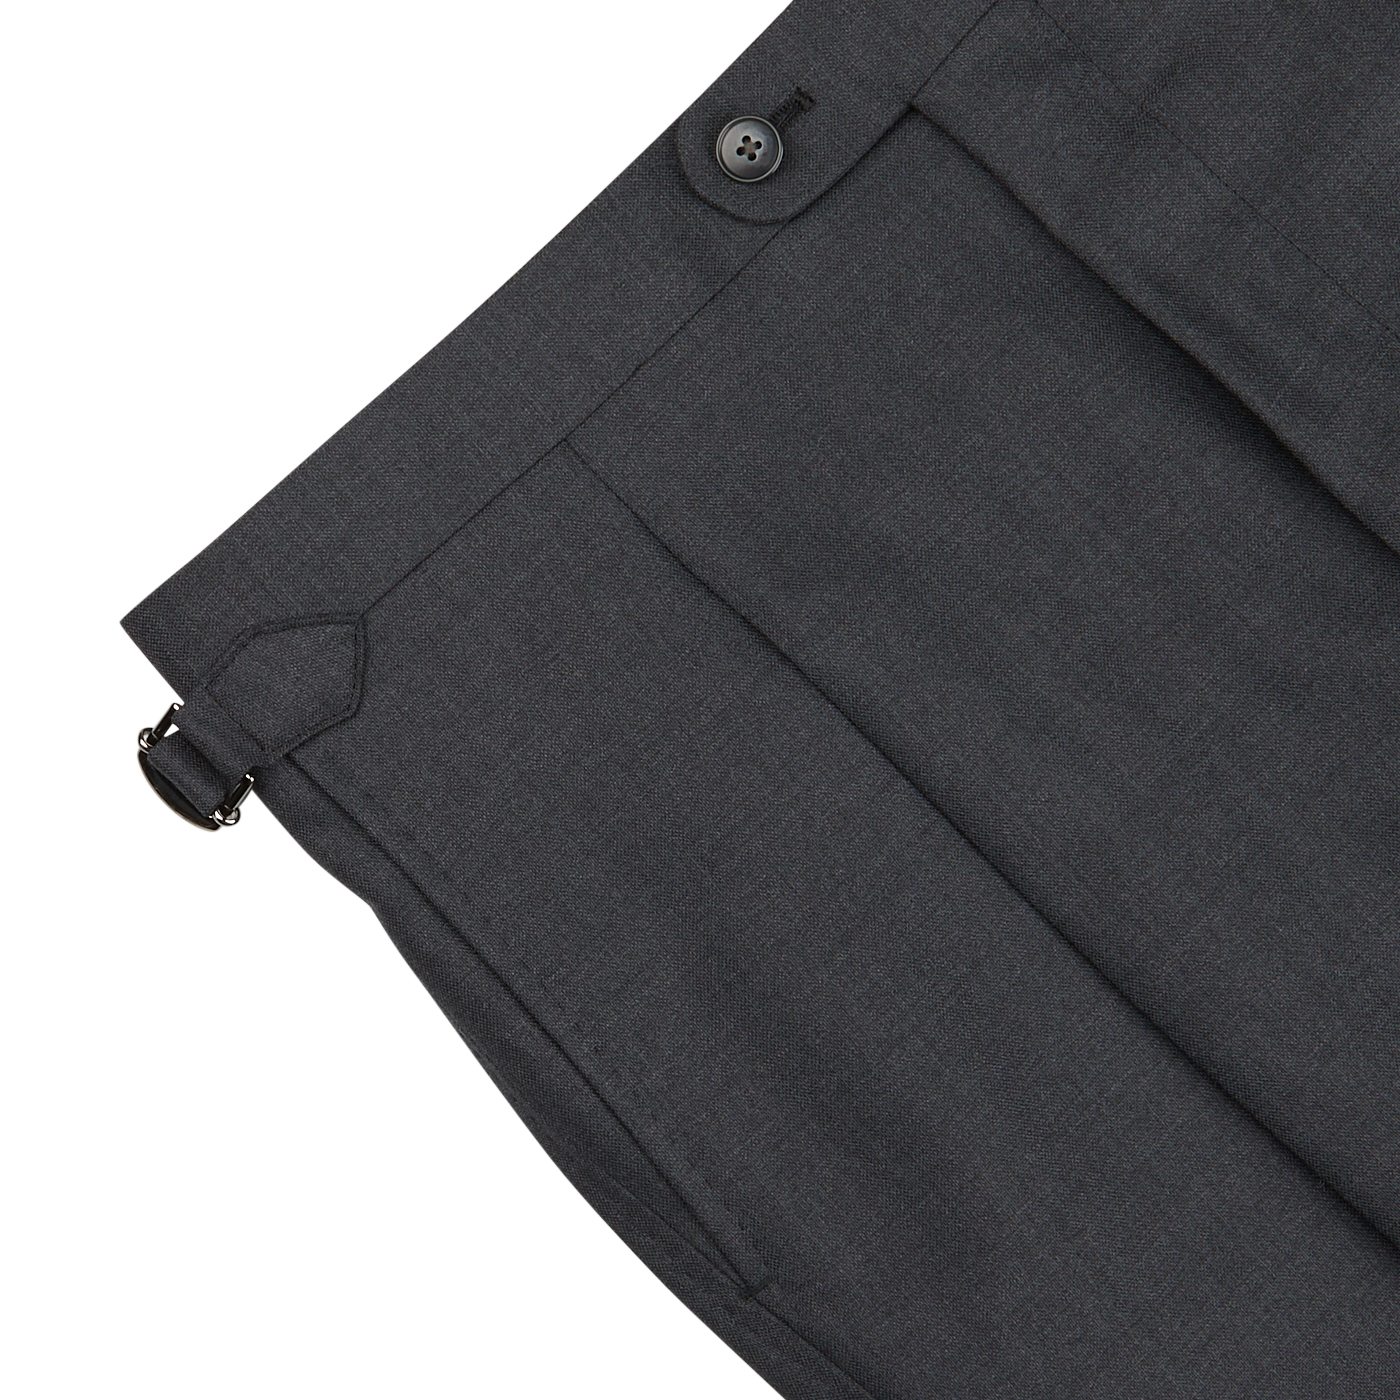 Close-up of Baltzar Sartorial Grey Super 100's Wool Pleated Suit Trousers with a side adjuster and button closure.